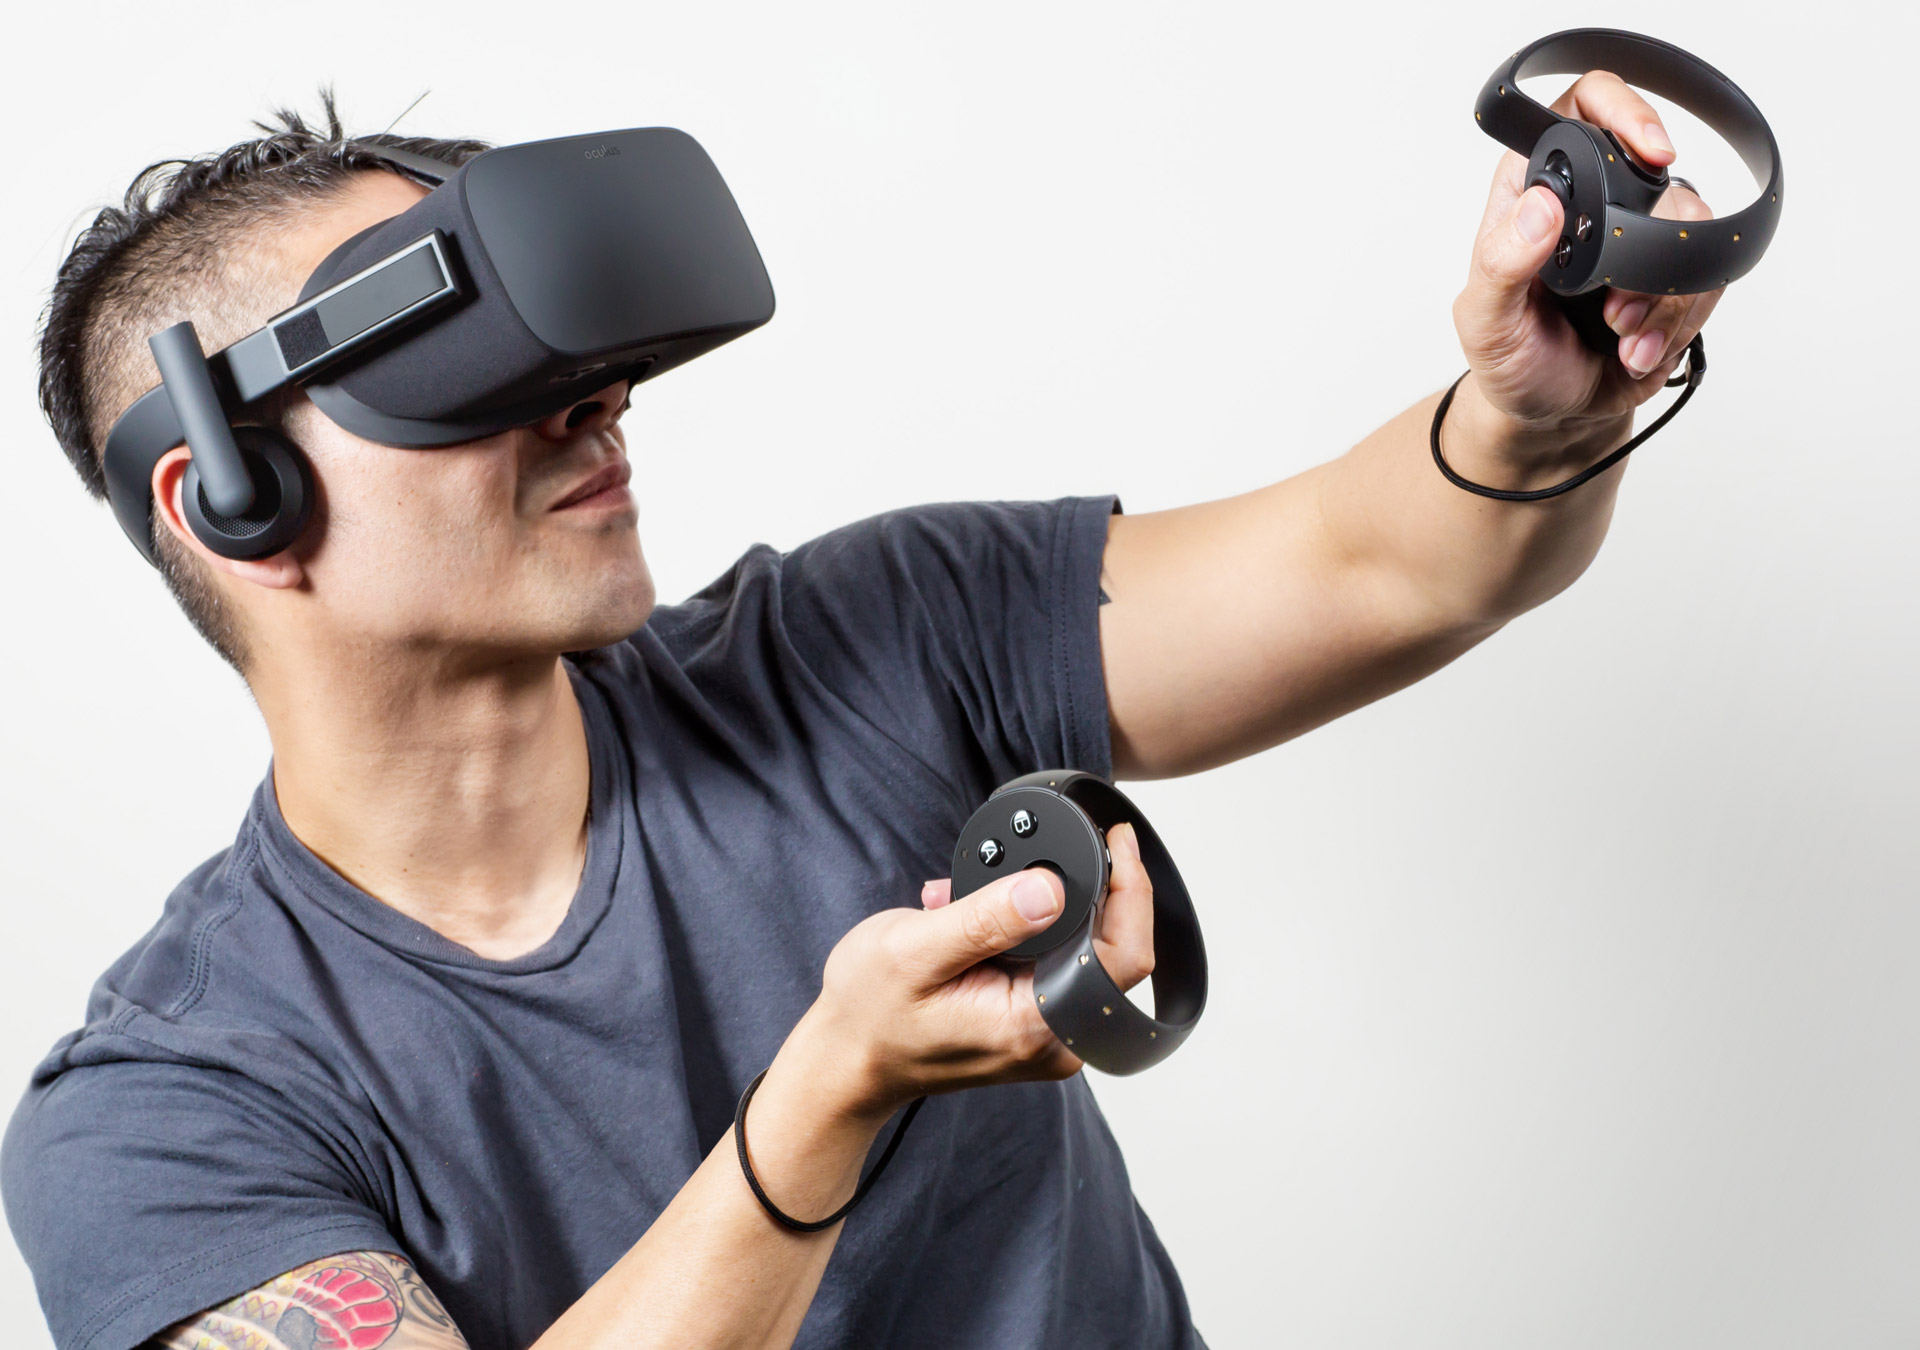 Oculus: Touch is "Fully of Roomscale Tracking, Skeptical It's "Absolutely Necessary for VR"